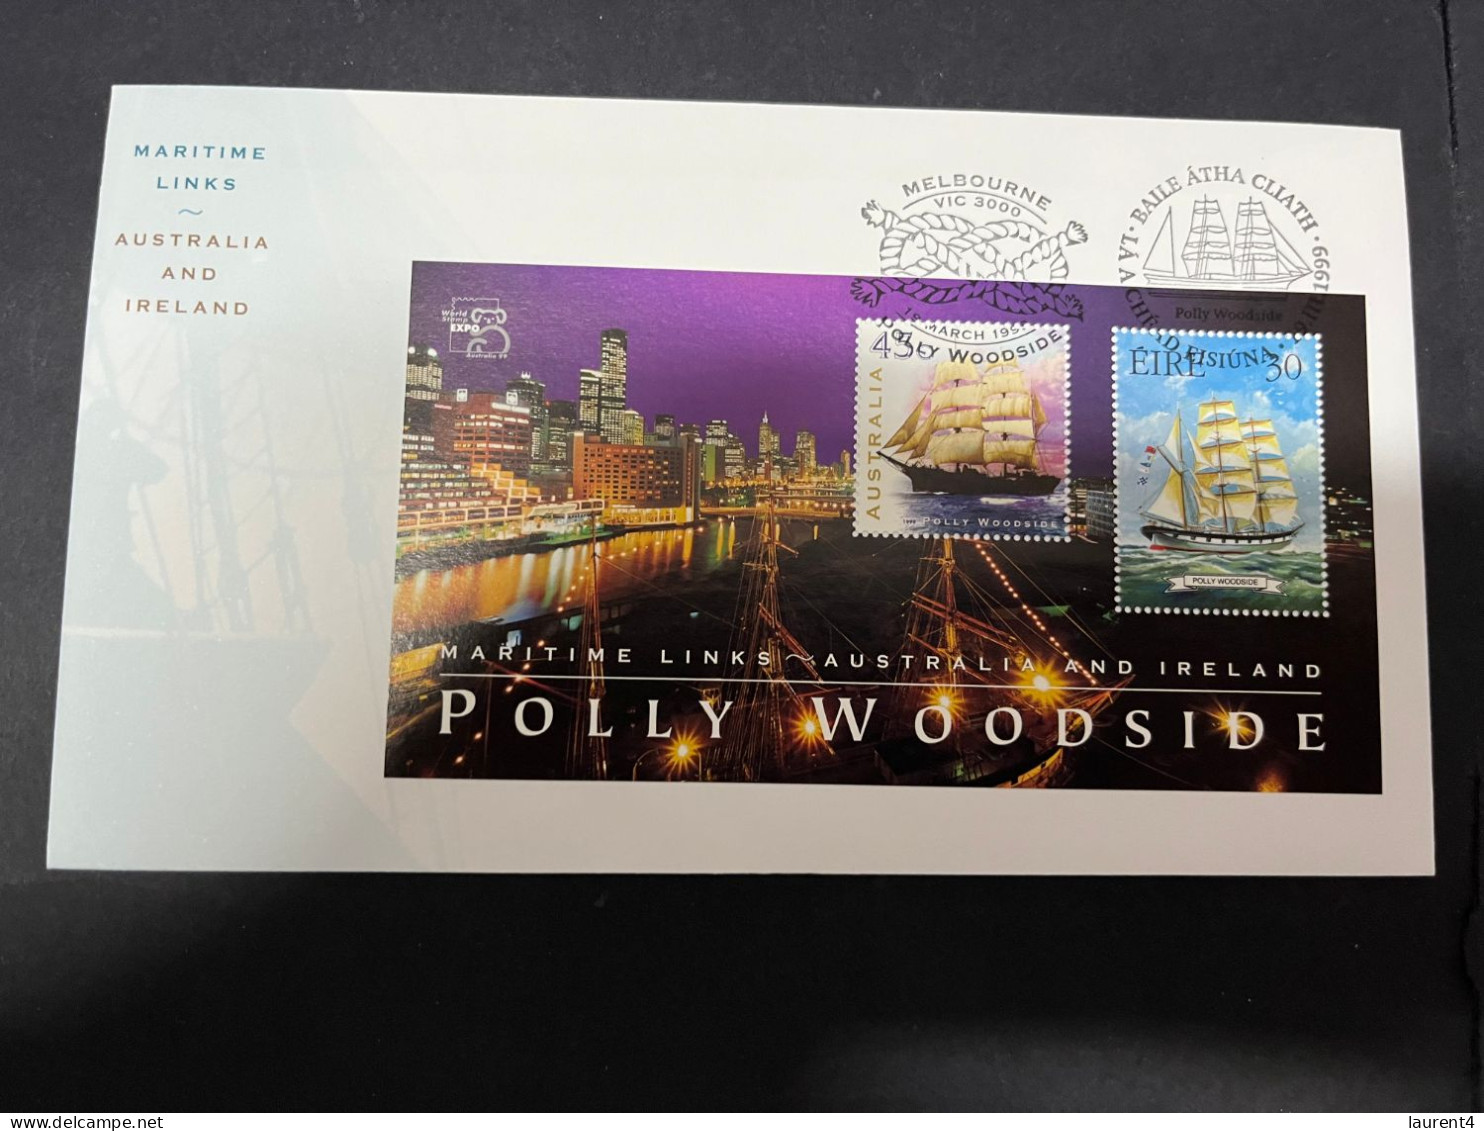 14-5-2024 (5 Z 9) Australia FDC - 1999 - (1 Cover) - Melbourne Stamp Show - Ireland / Australia Joint Issue (Polly Ship) - Premiers Jours (FDC)